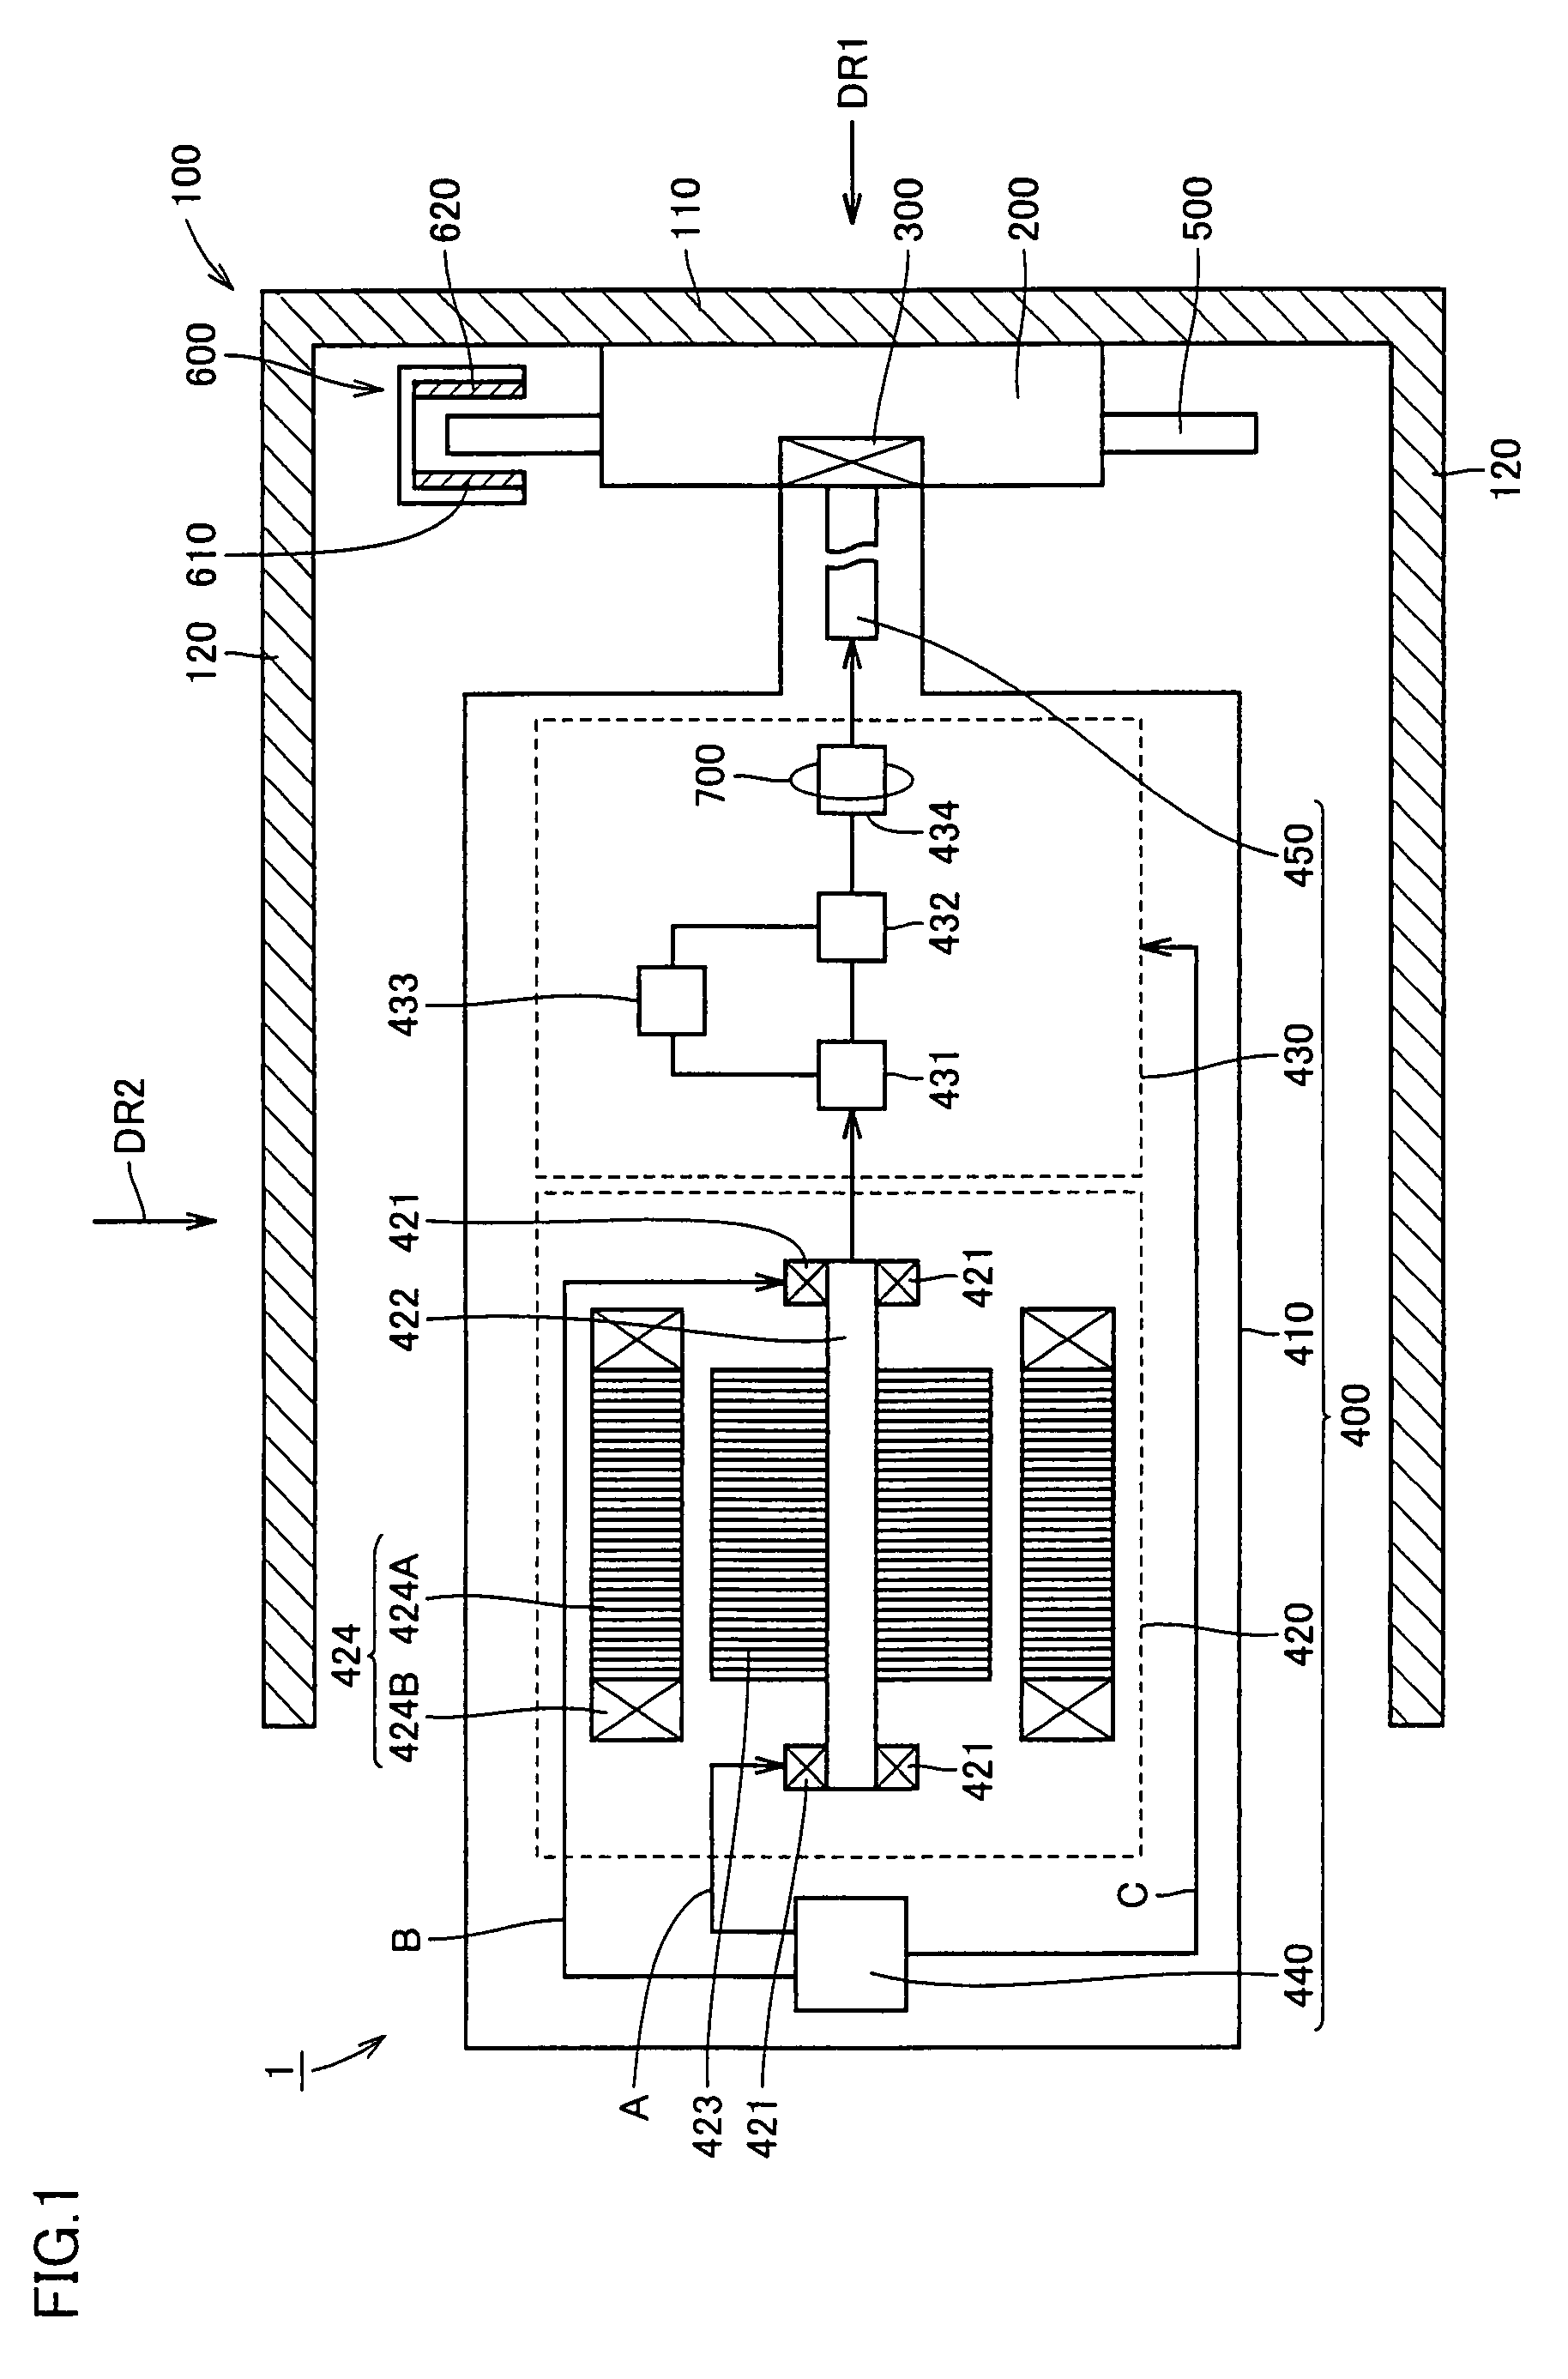 Electrically driven wheel and vehicle